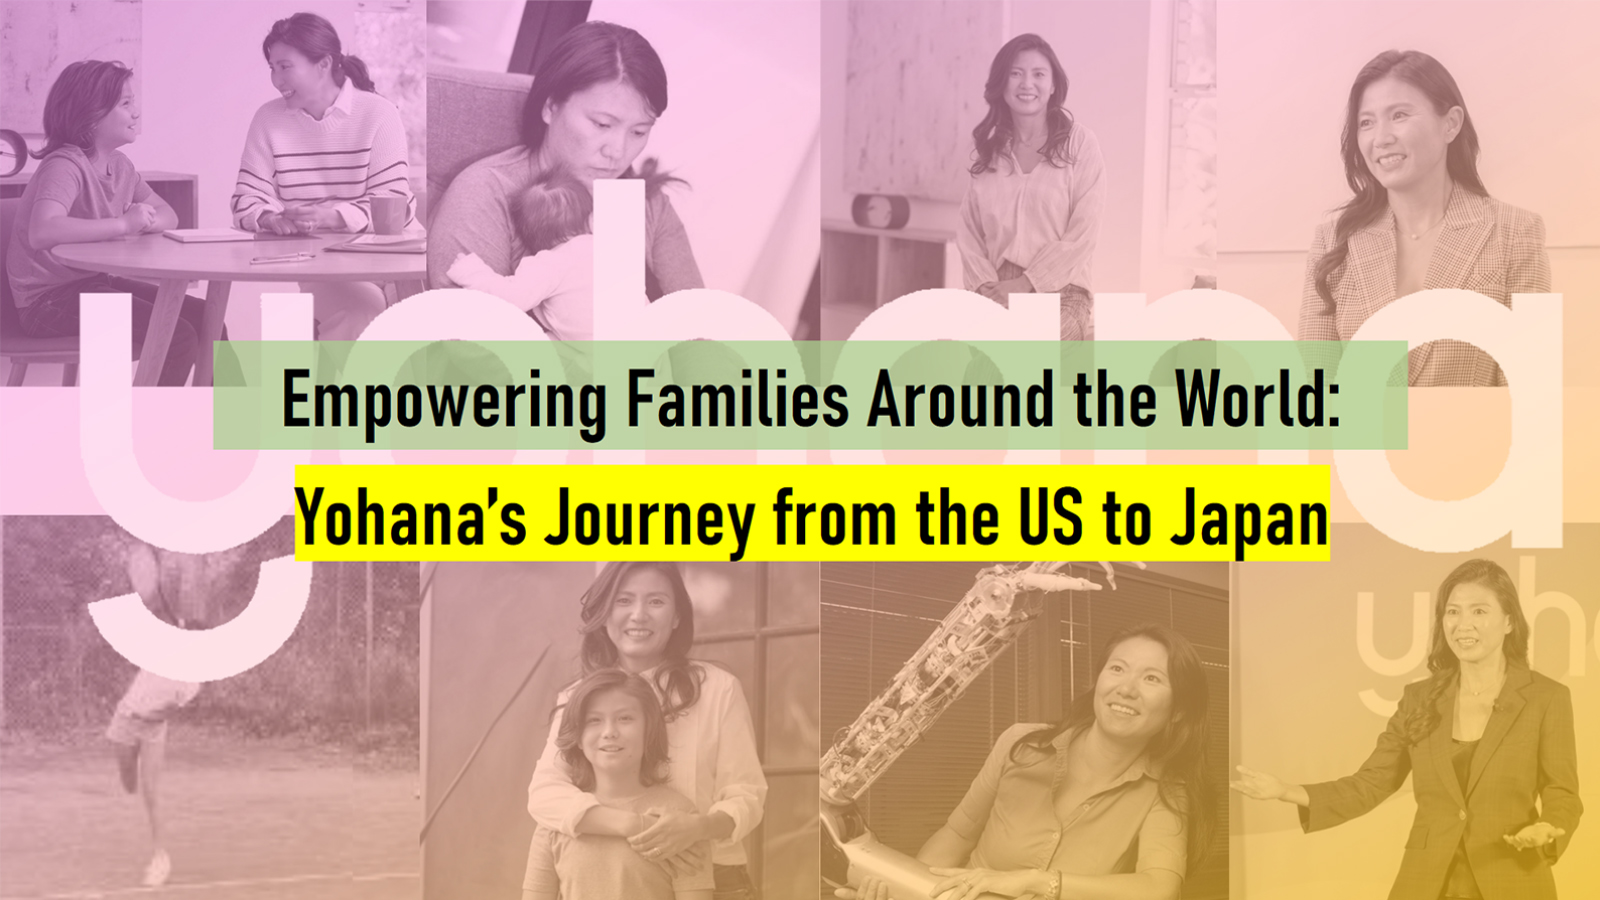 Image: Empowering Families Around the World: Yohana’s Journey from the US to Japan